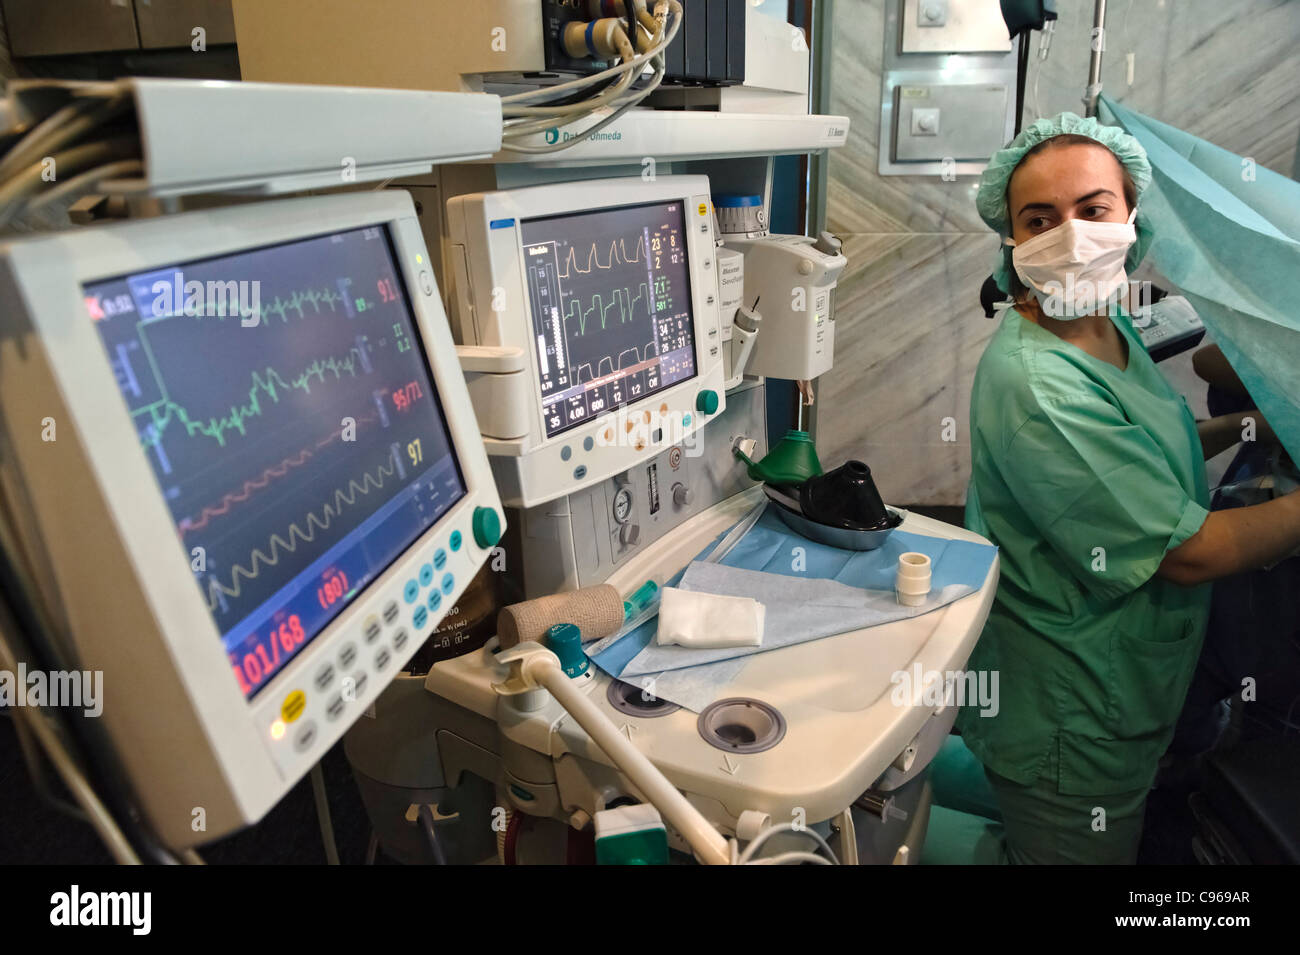 The Vital Signs Monitor in Operating Room in Hospital. Stock Image - Image  of health, device: 183419259